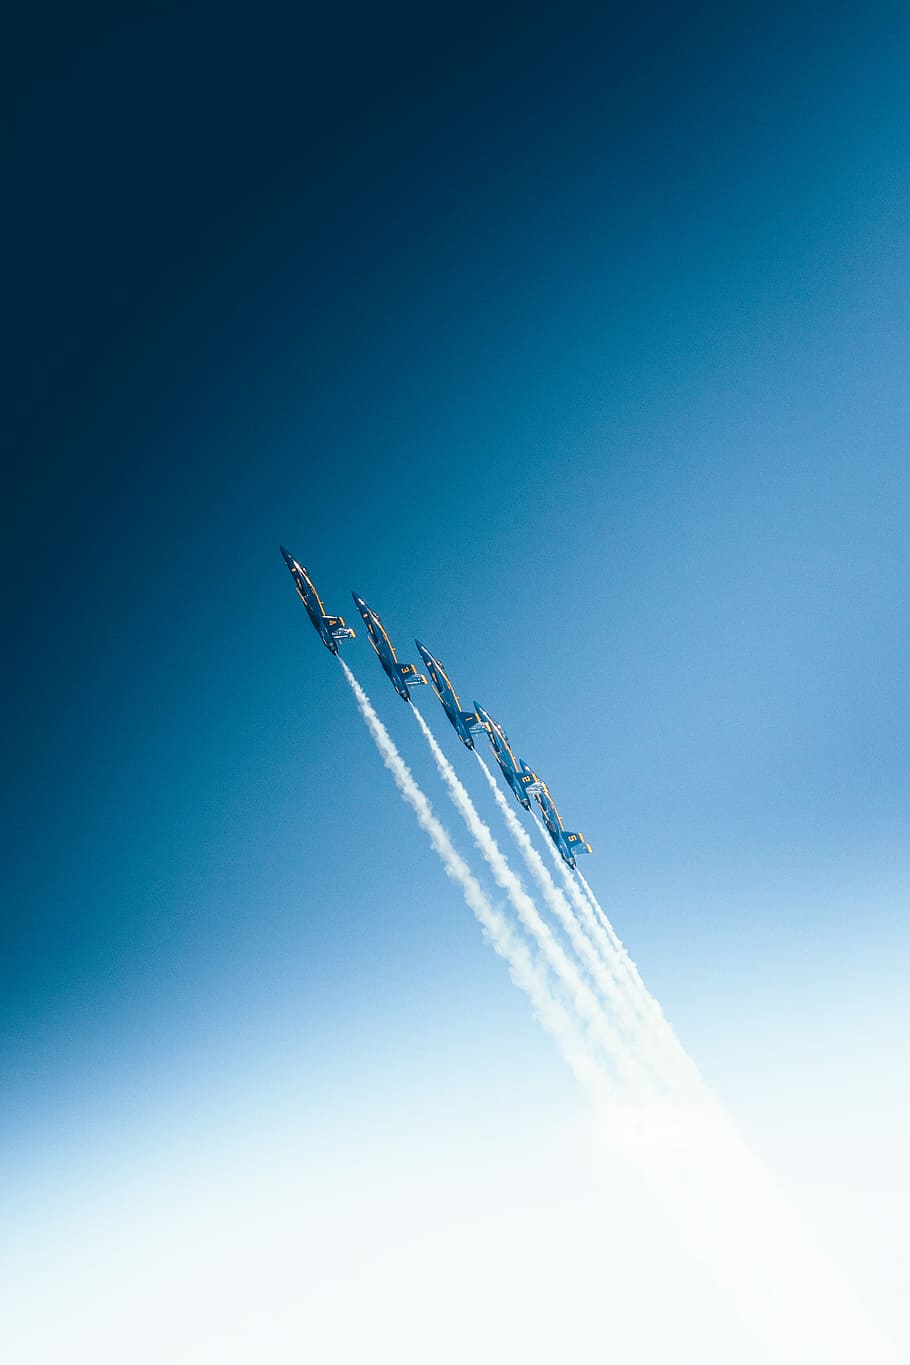 five jet flying in sky, jet plane with smoke in the air, wallpaper